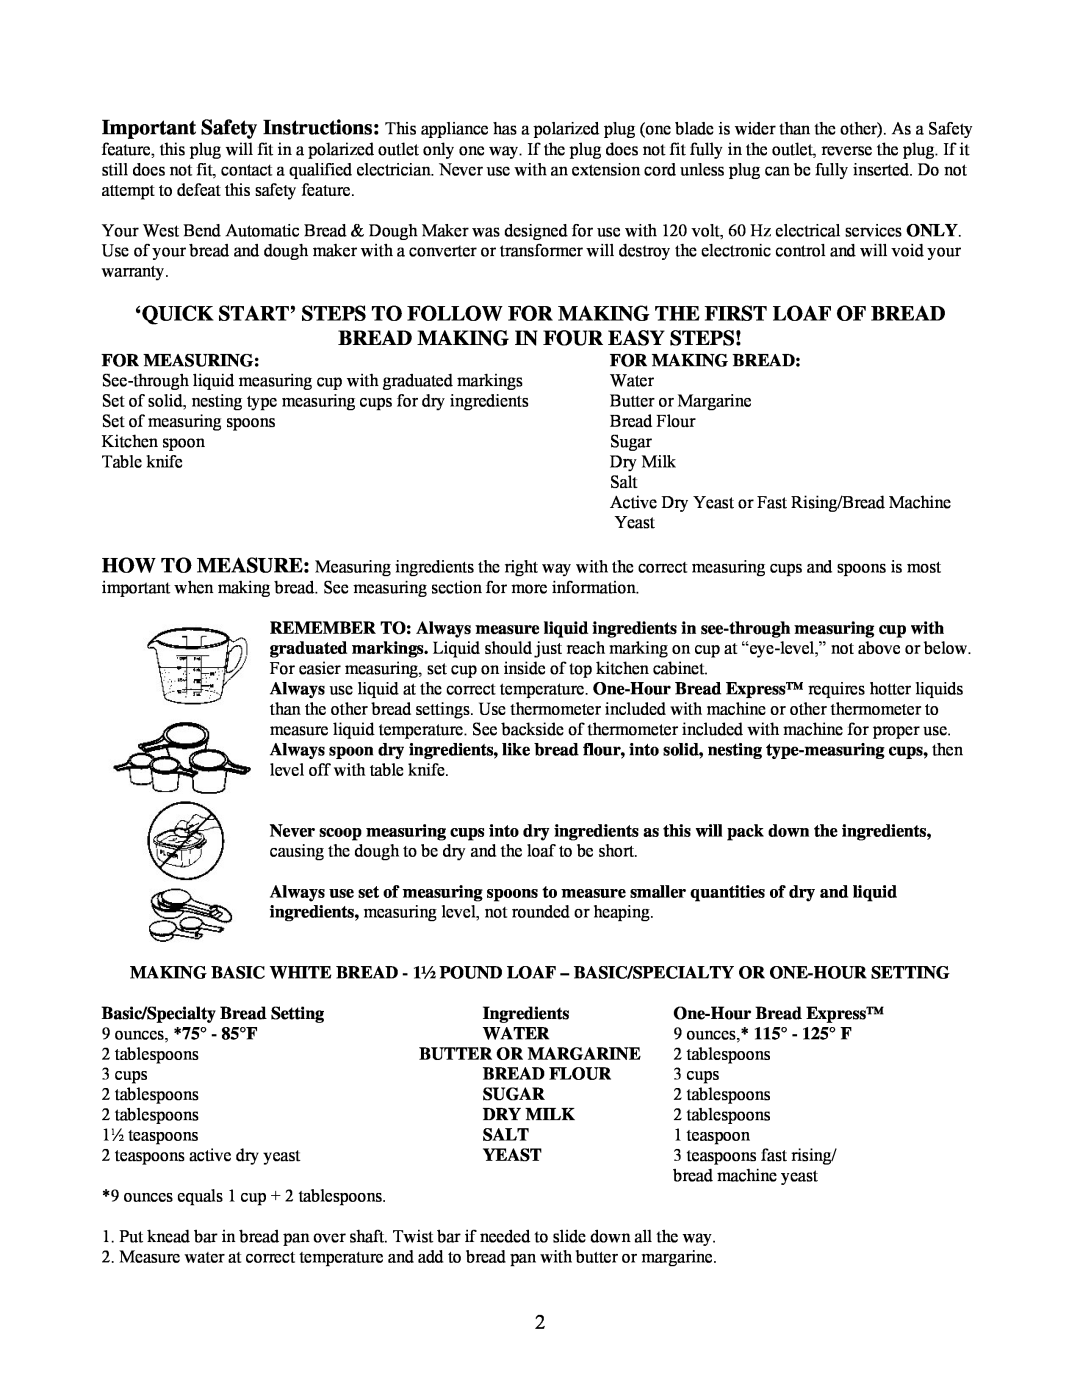 West Bend L5141 manual ‘Quick Start’ Steps To Follow For Making The First Loaf Of Bread, Bread Making In Four Easy Steps 